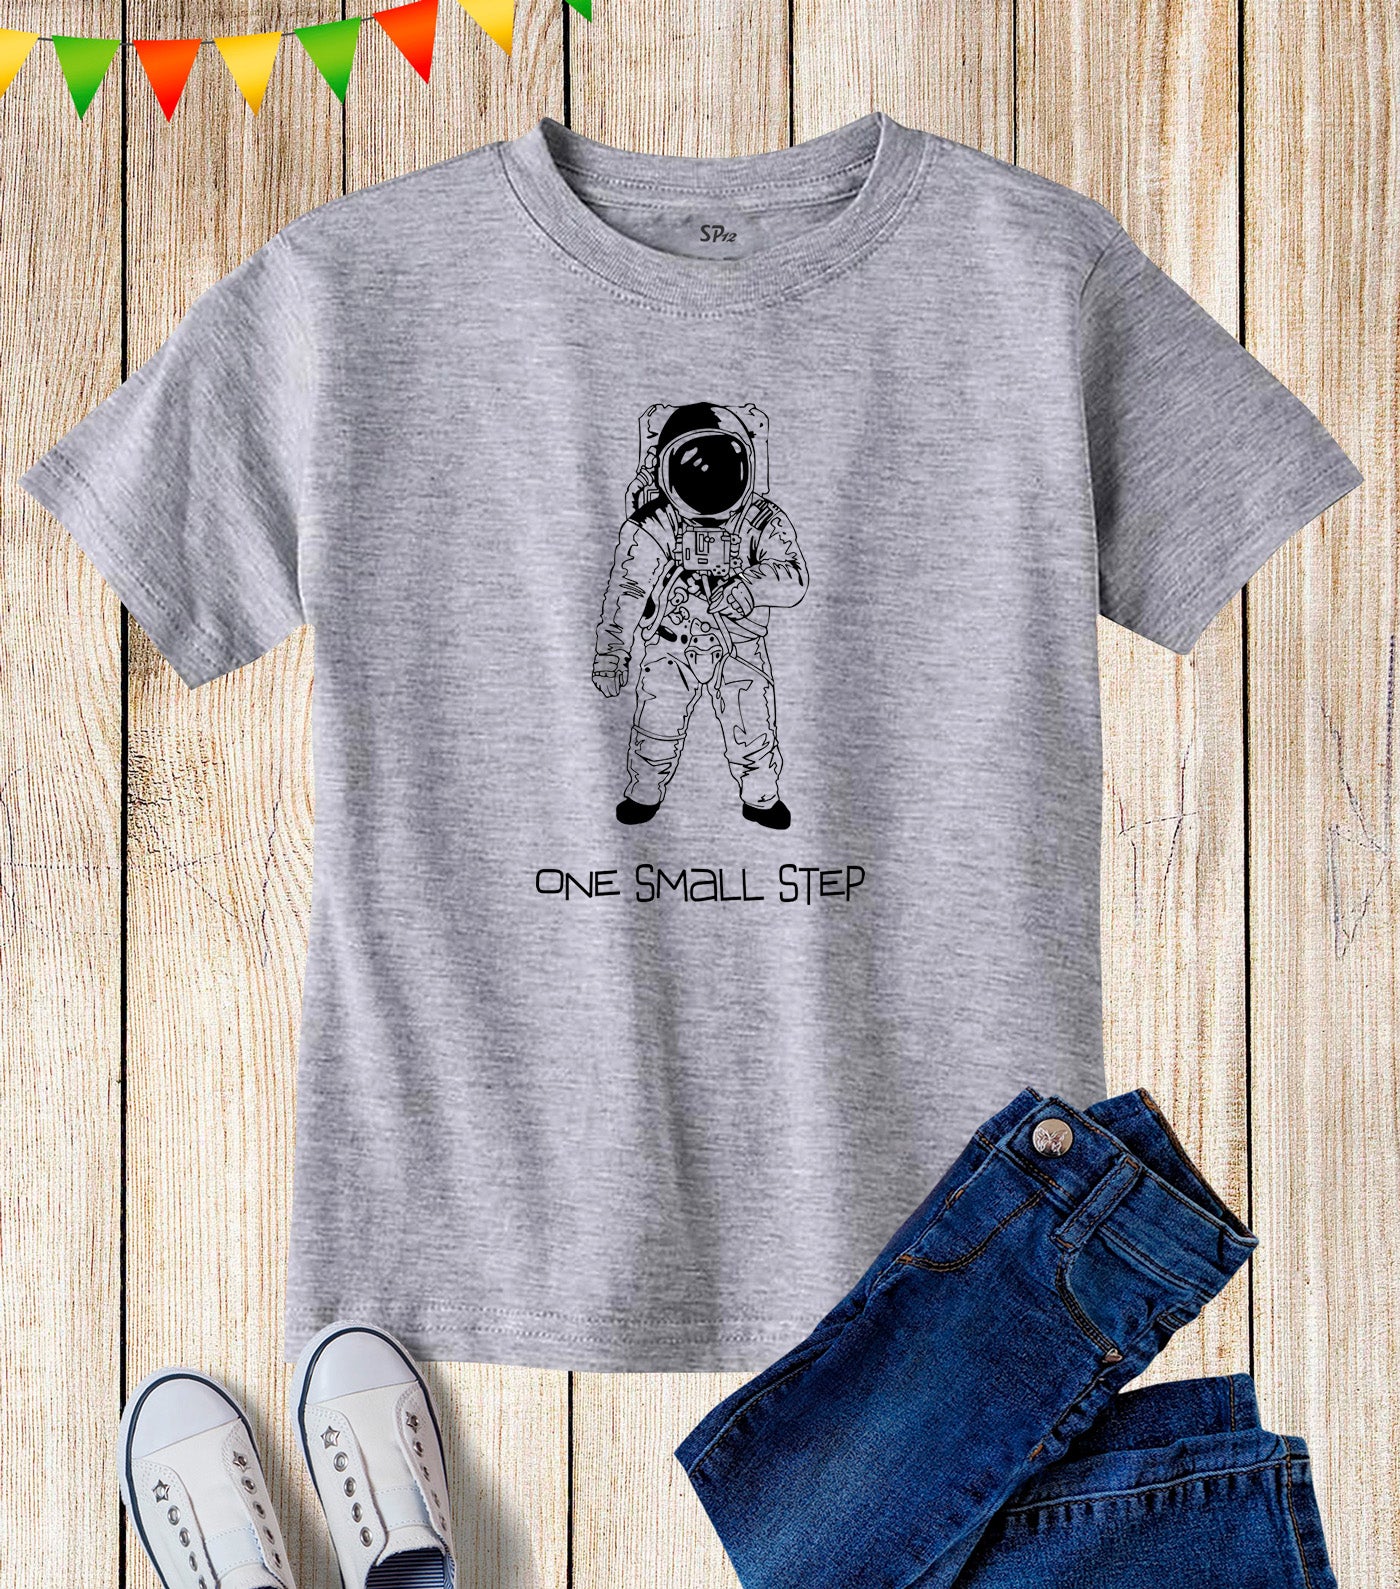 One's Small Step Kids T Shirt